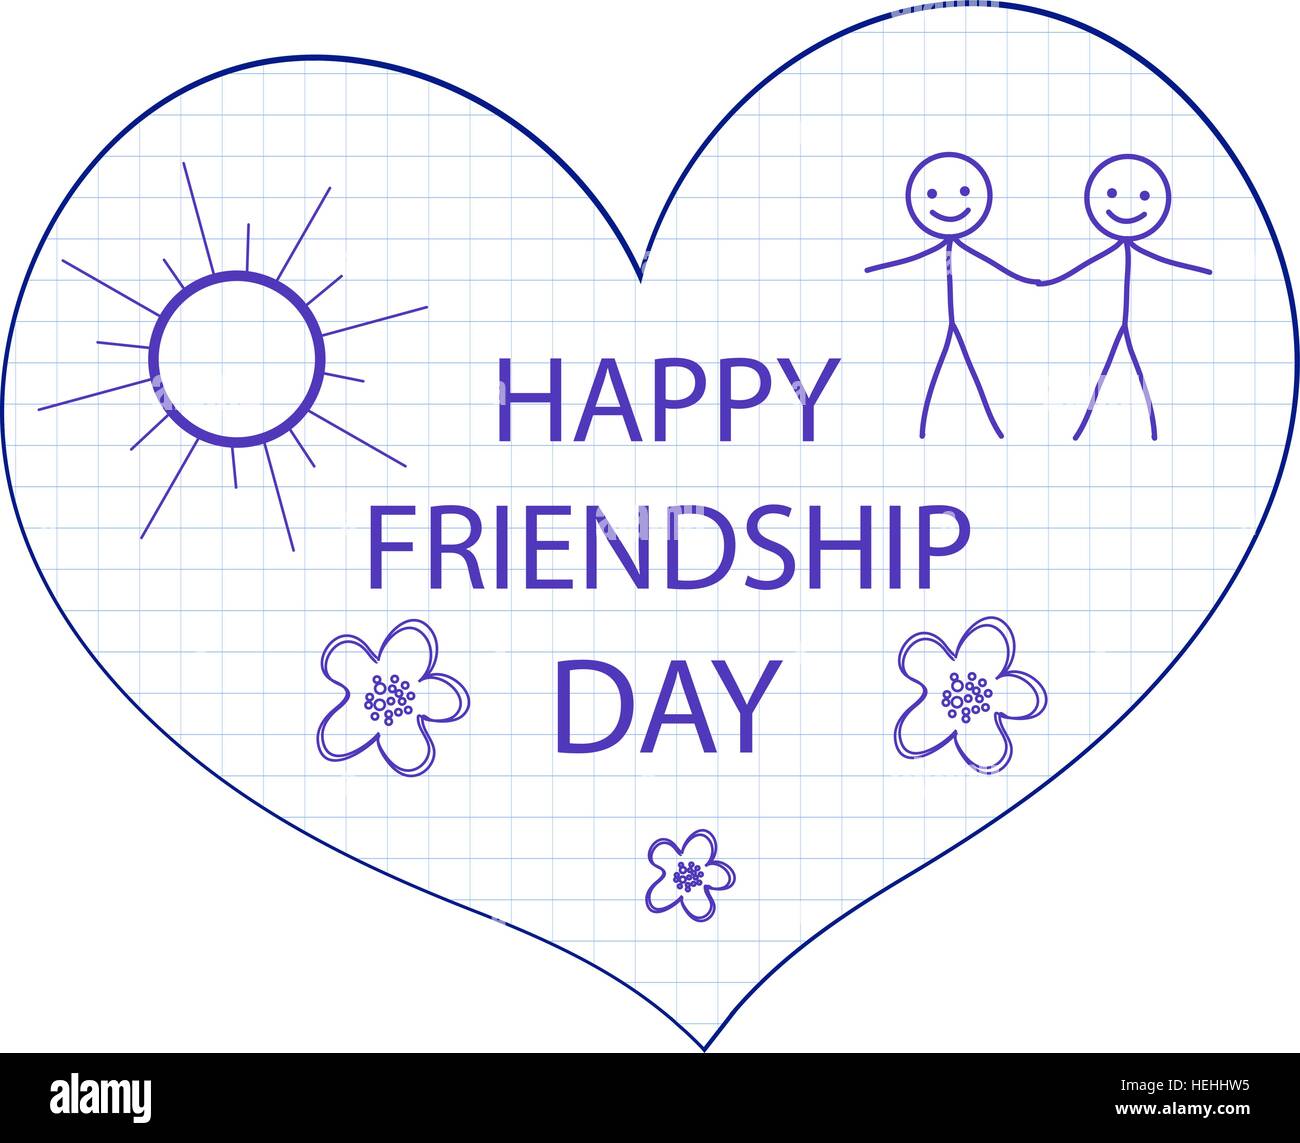 Greeting card with a happy friendship day. Greeting heart hand ...